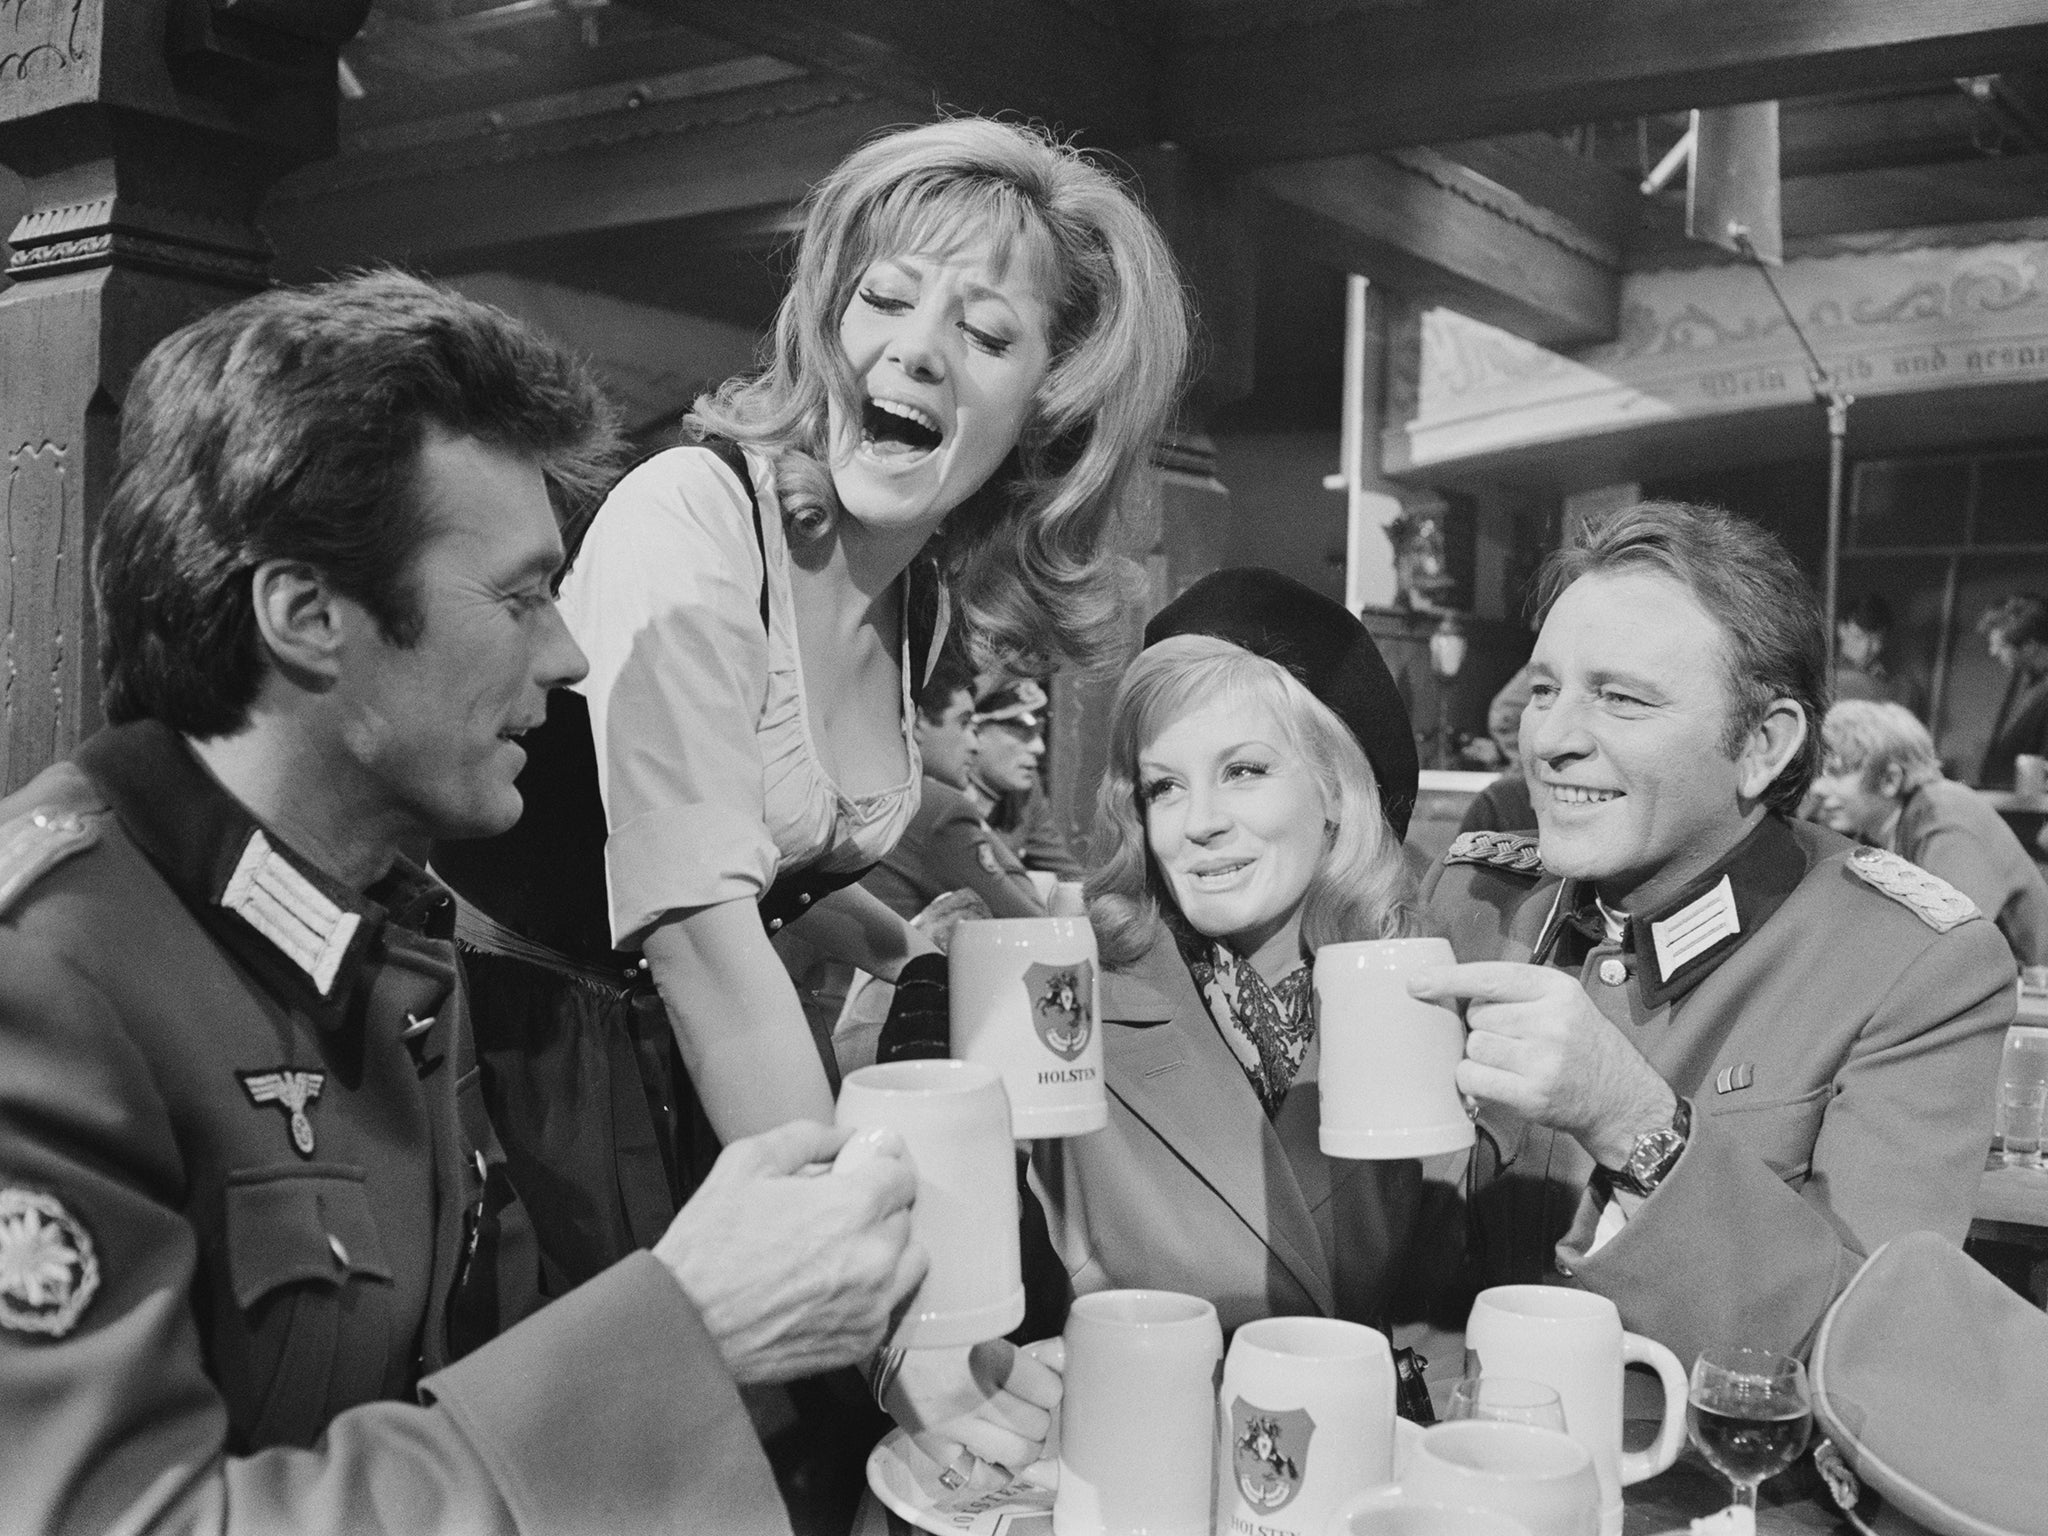 Clint Eastwood, Mary Ure, Ingrid Pitt and Richard Burton on the set of ‘Where Eagles Dare’